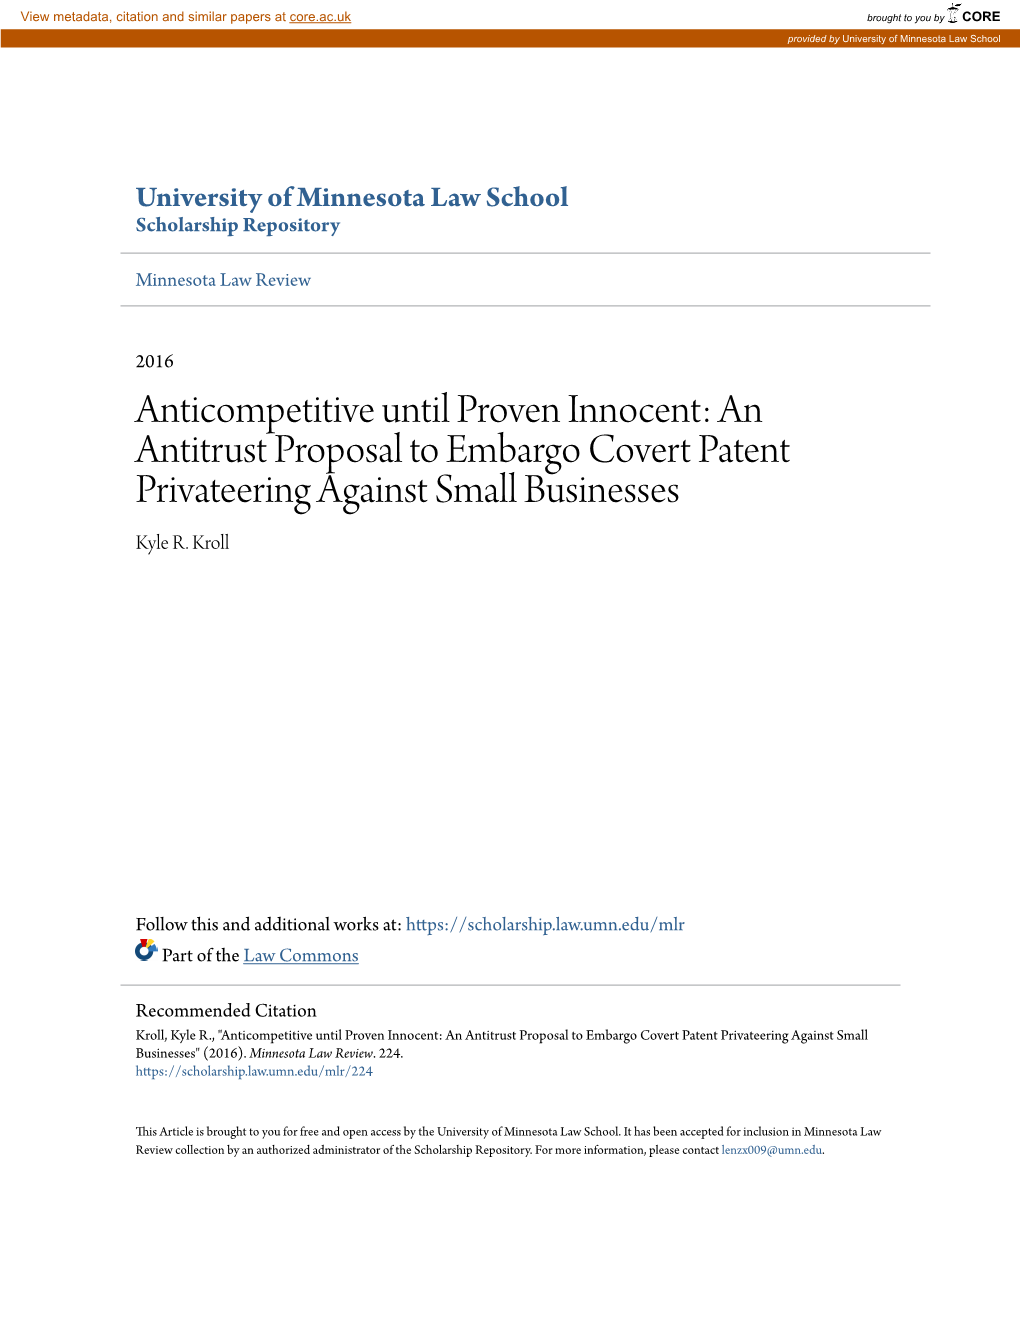 An Antitrust Proposal to Embargo Covert Patent Privateering Against Small Businesses Kyle R